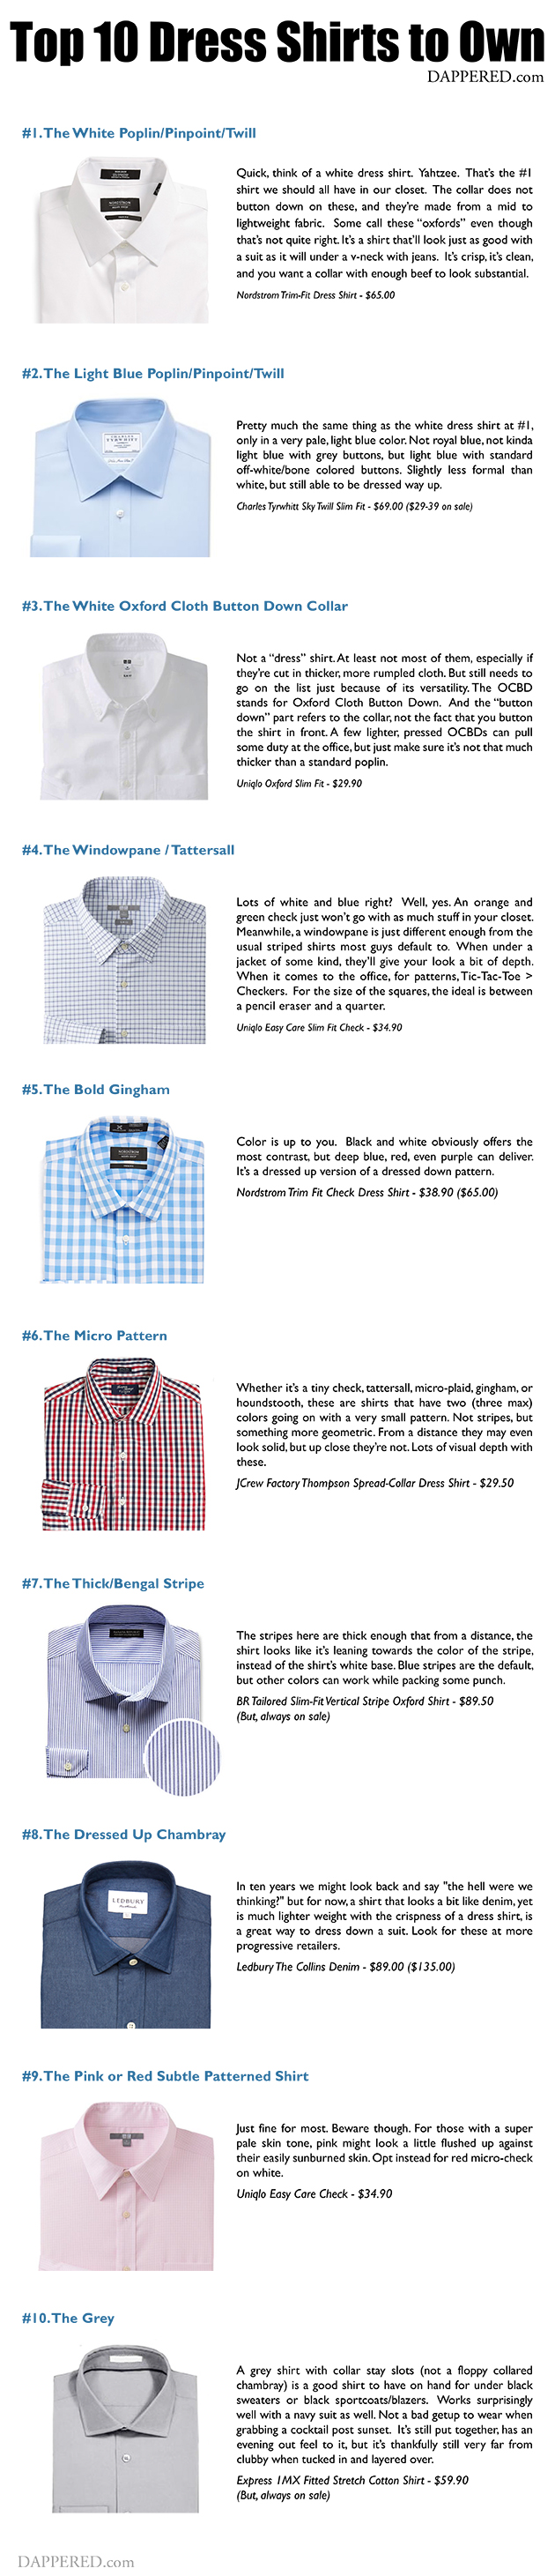 The Top 10 Types of Dress Shirts to Own | Dappered.com